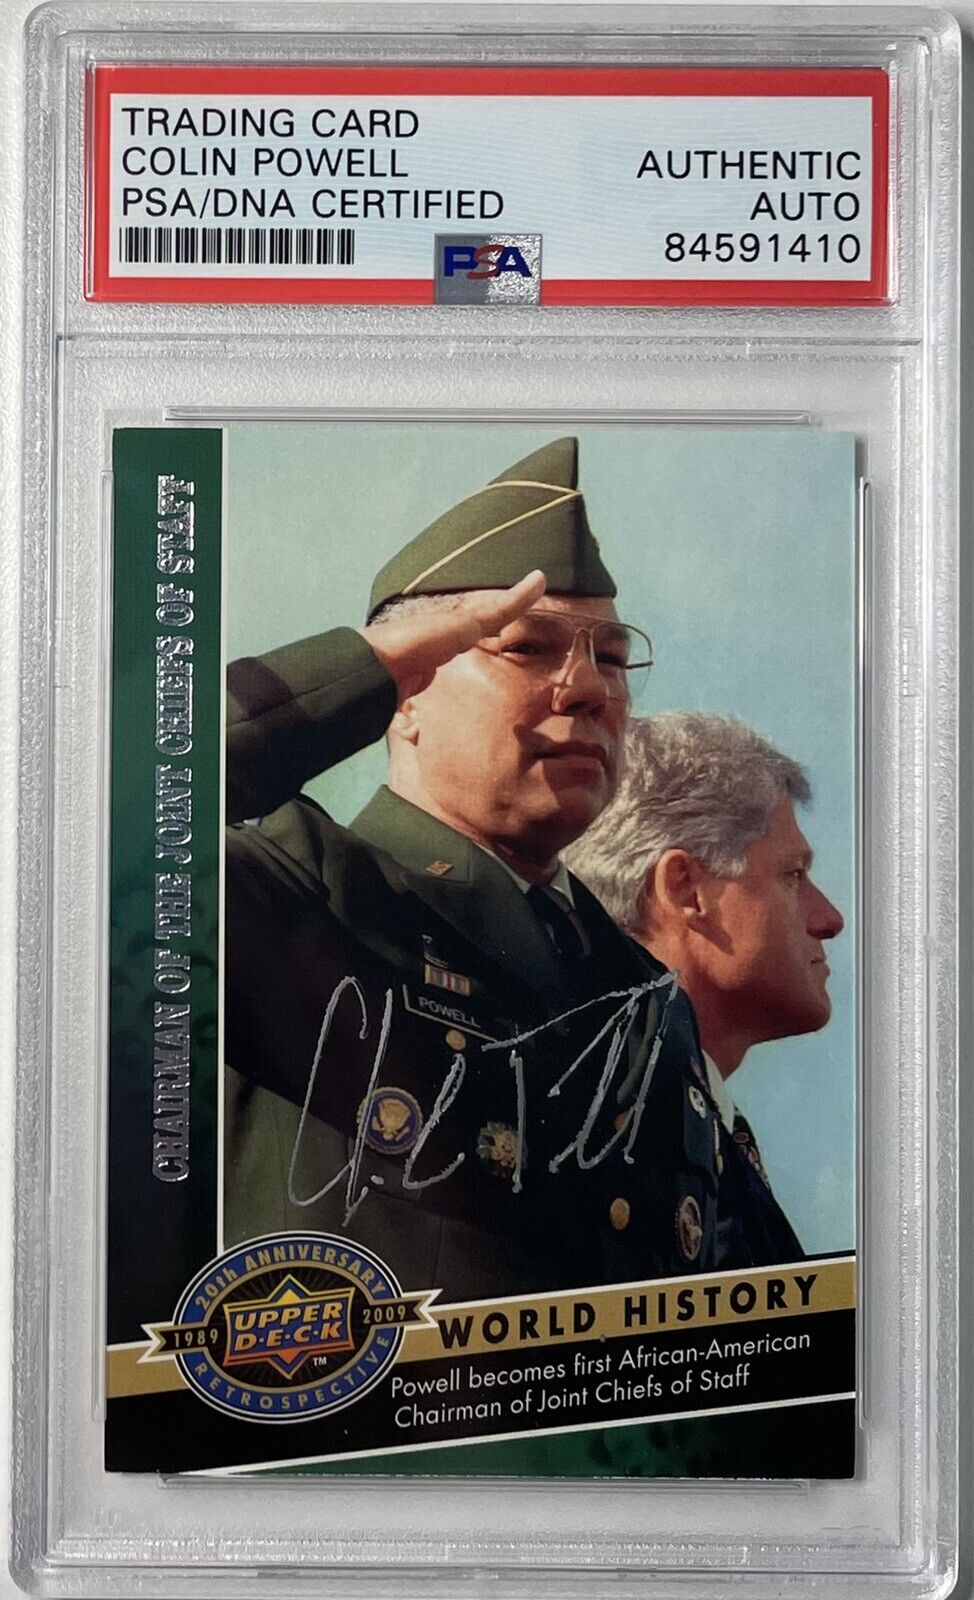 2009 UPPER DECK GENERAL COLIN POWELL SIGNED AUTOGRAPH PSA DNA CERTIFIED